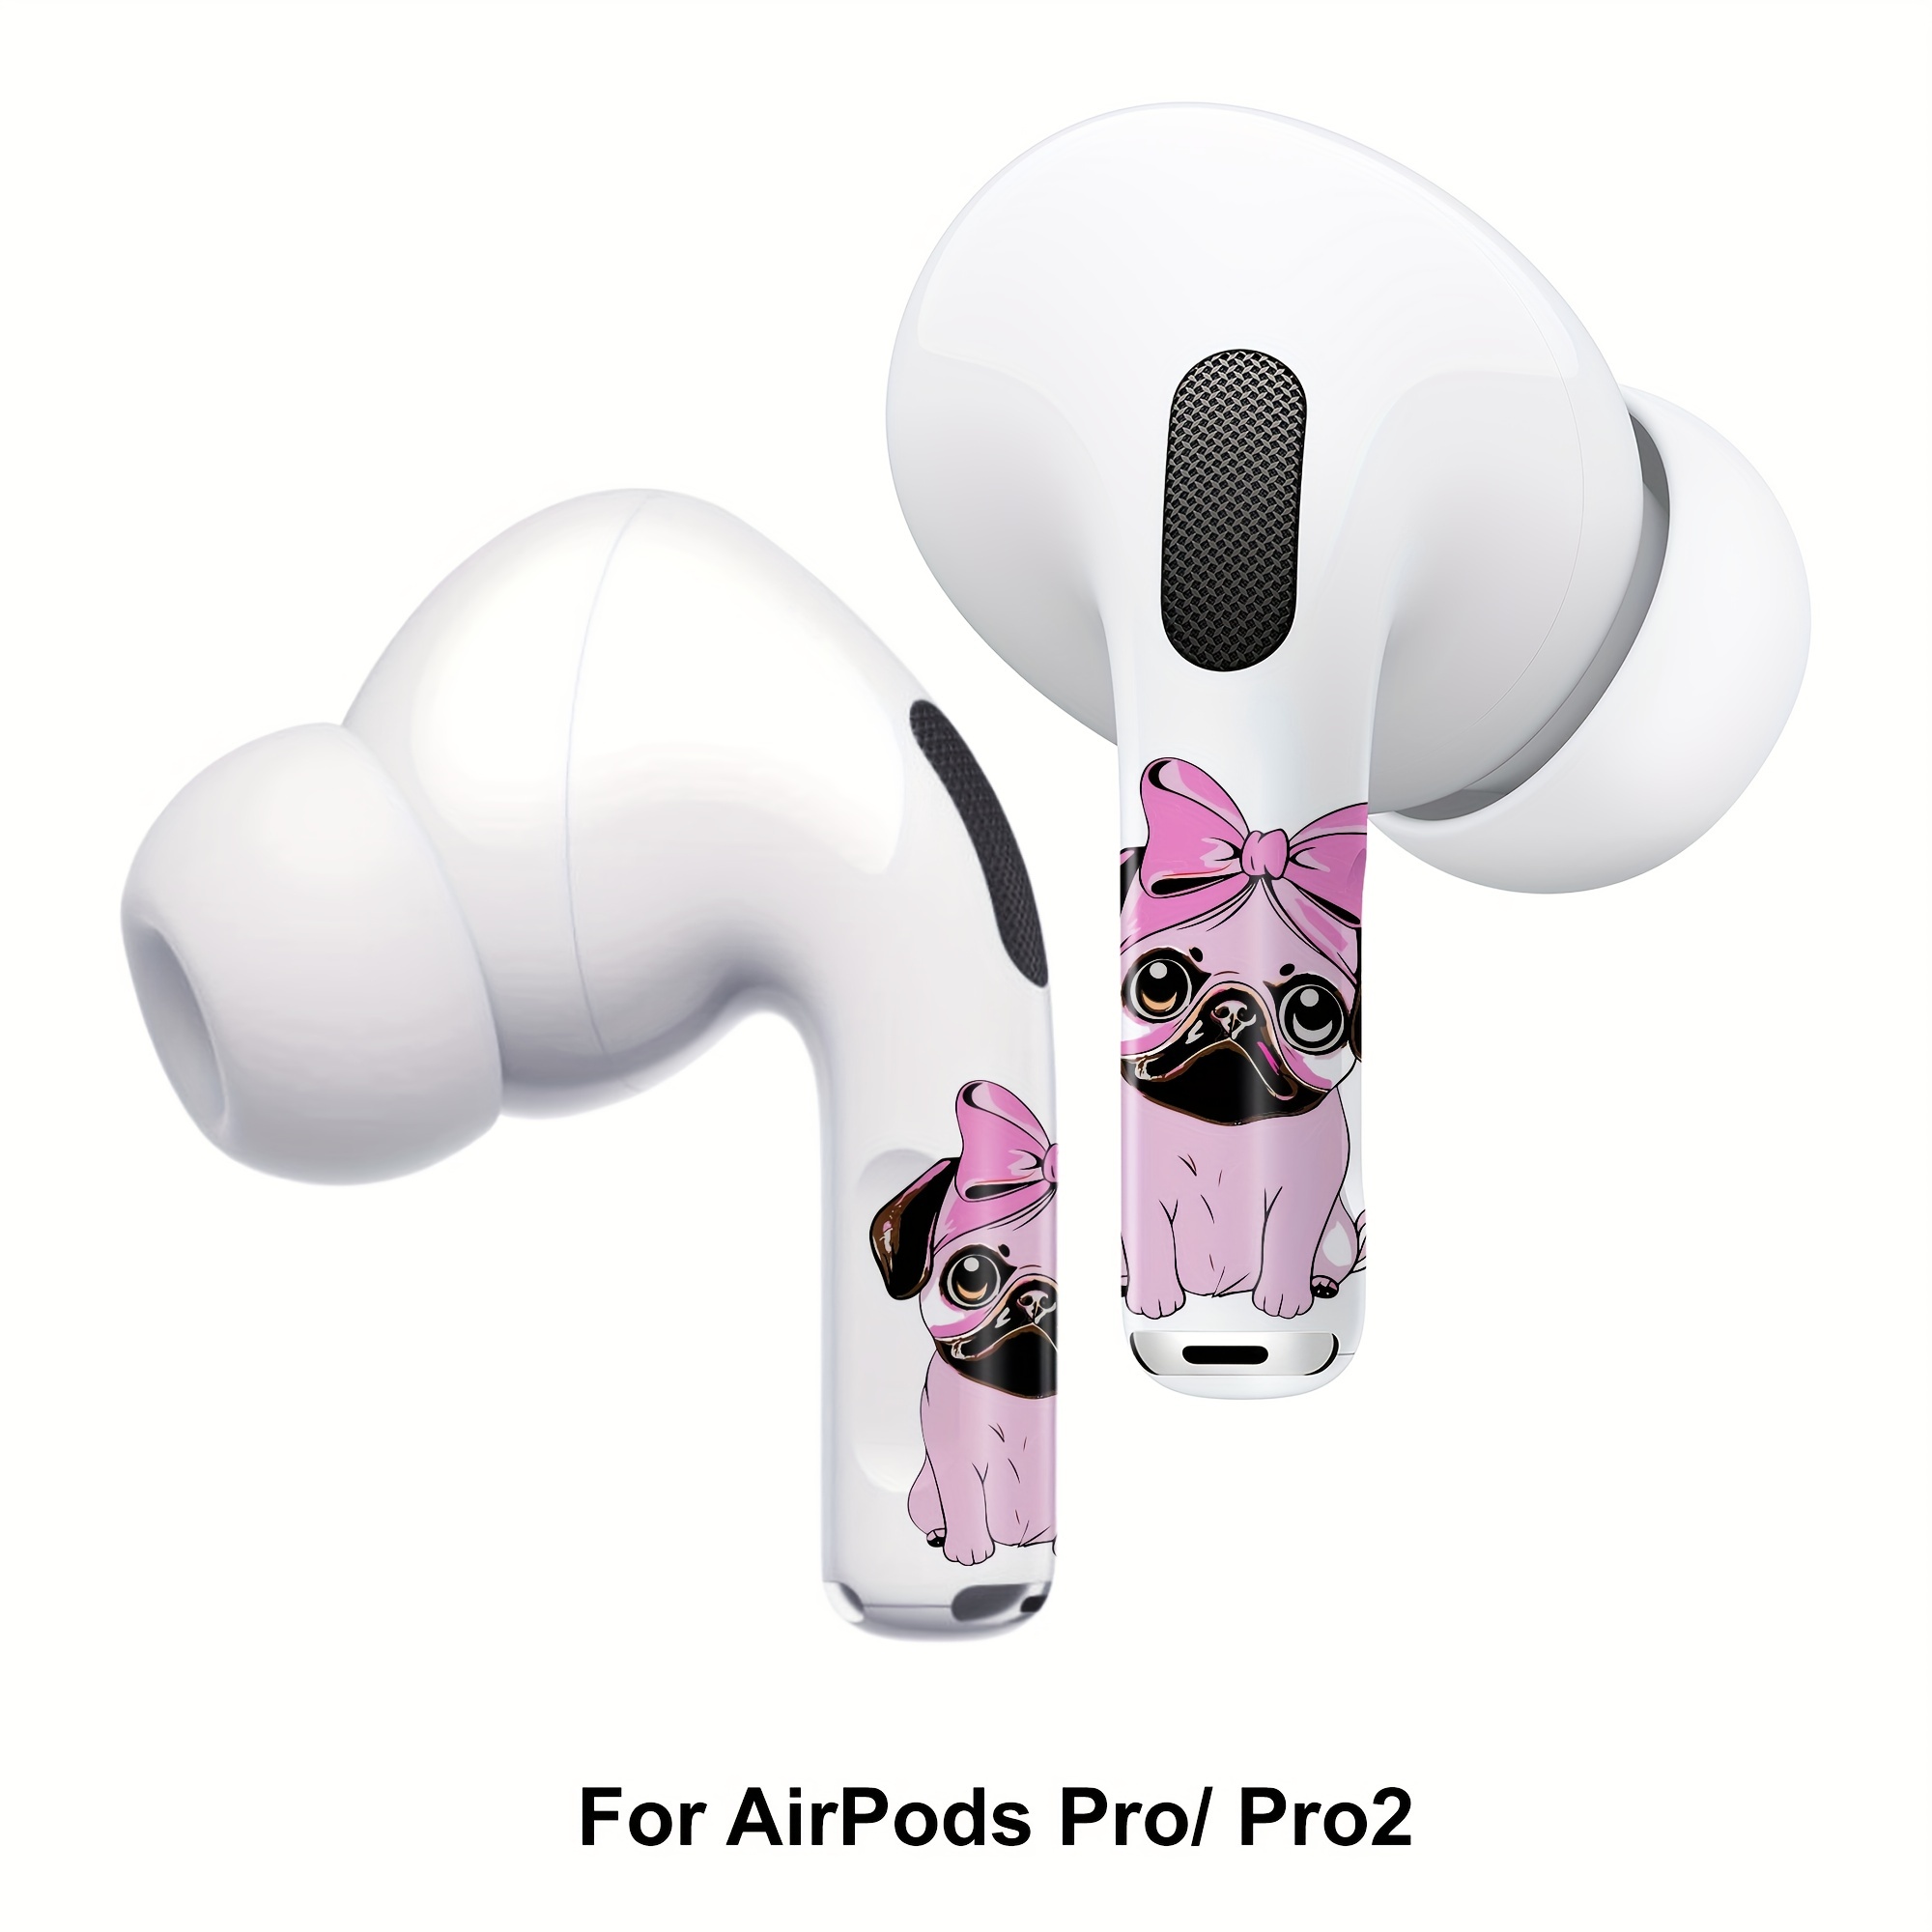 Case for Airpod Pro Funny Fun Cartoon Silicone Designer Design Cute 3D  Fashion Cool Stylish Trendy for Kids Men Boys Teens Girls Air pods Pro Soft  Skin Cover for Airpods Pro Shark 